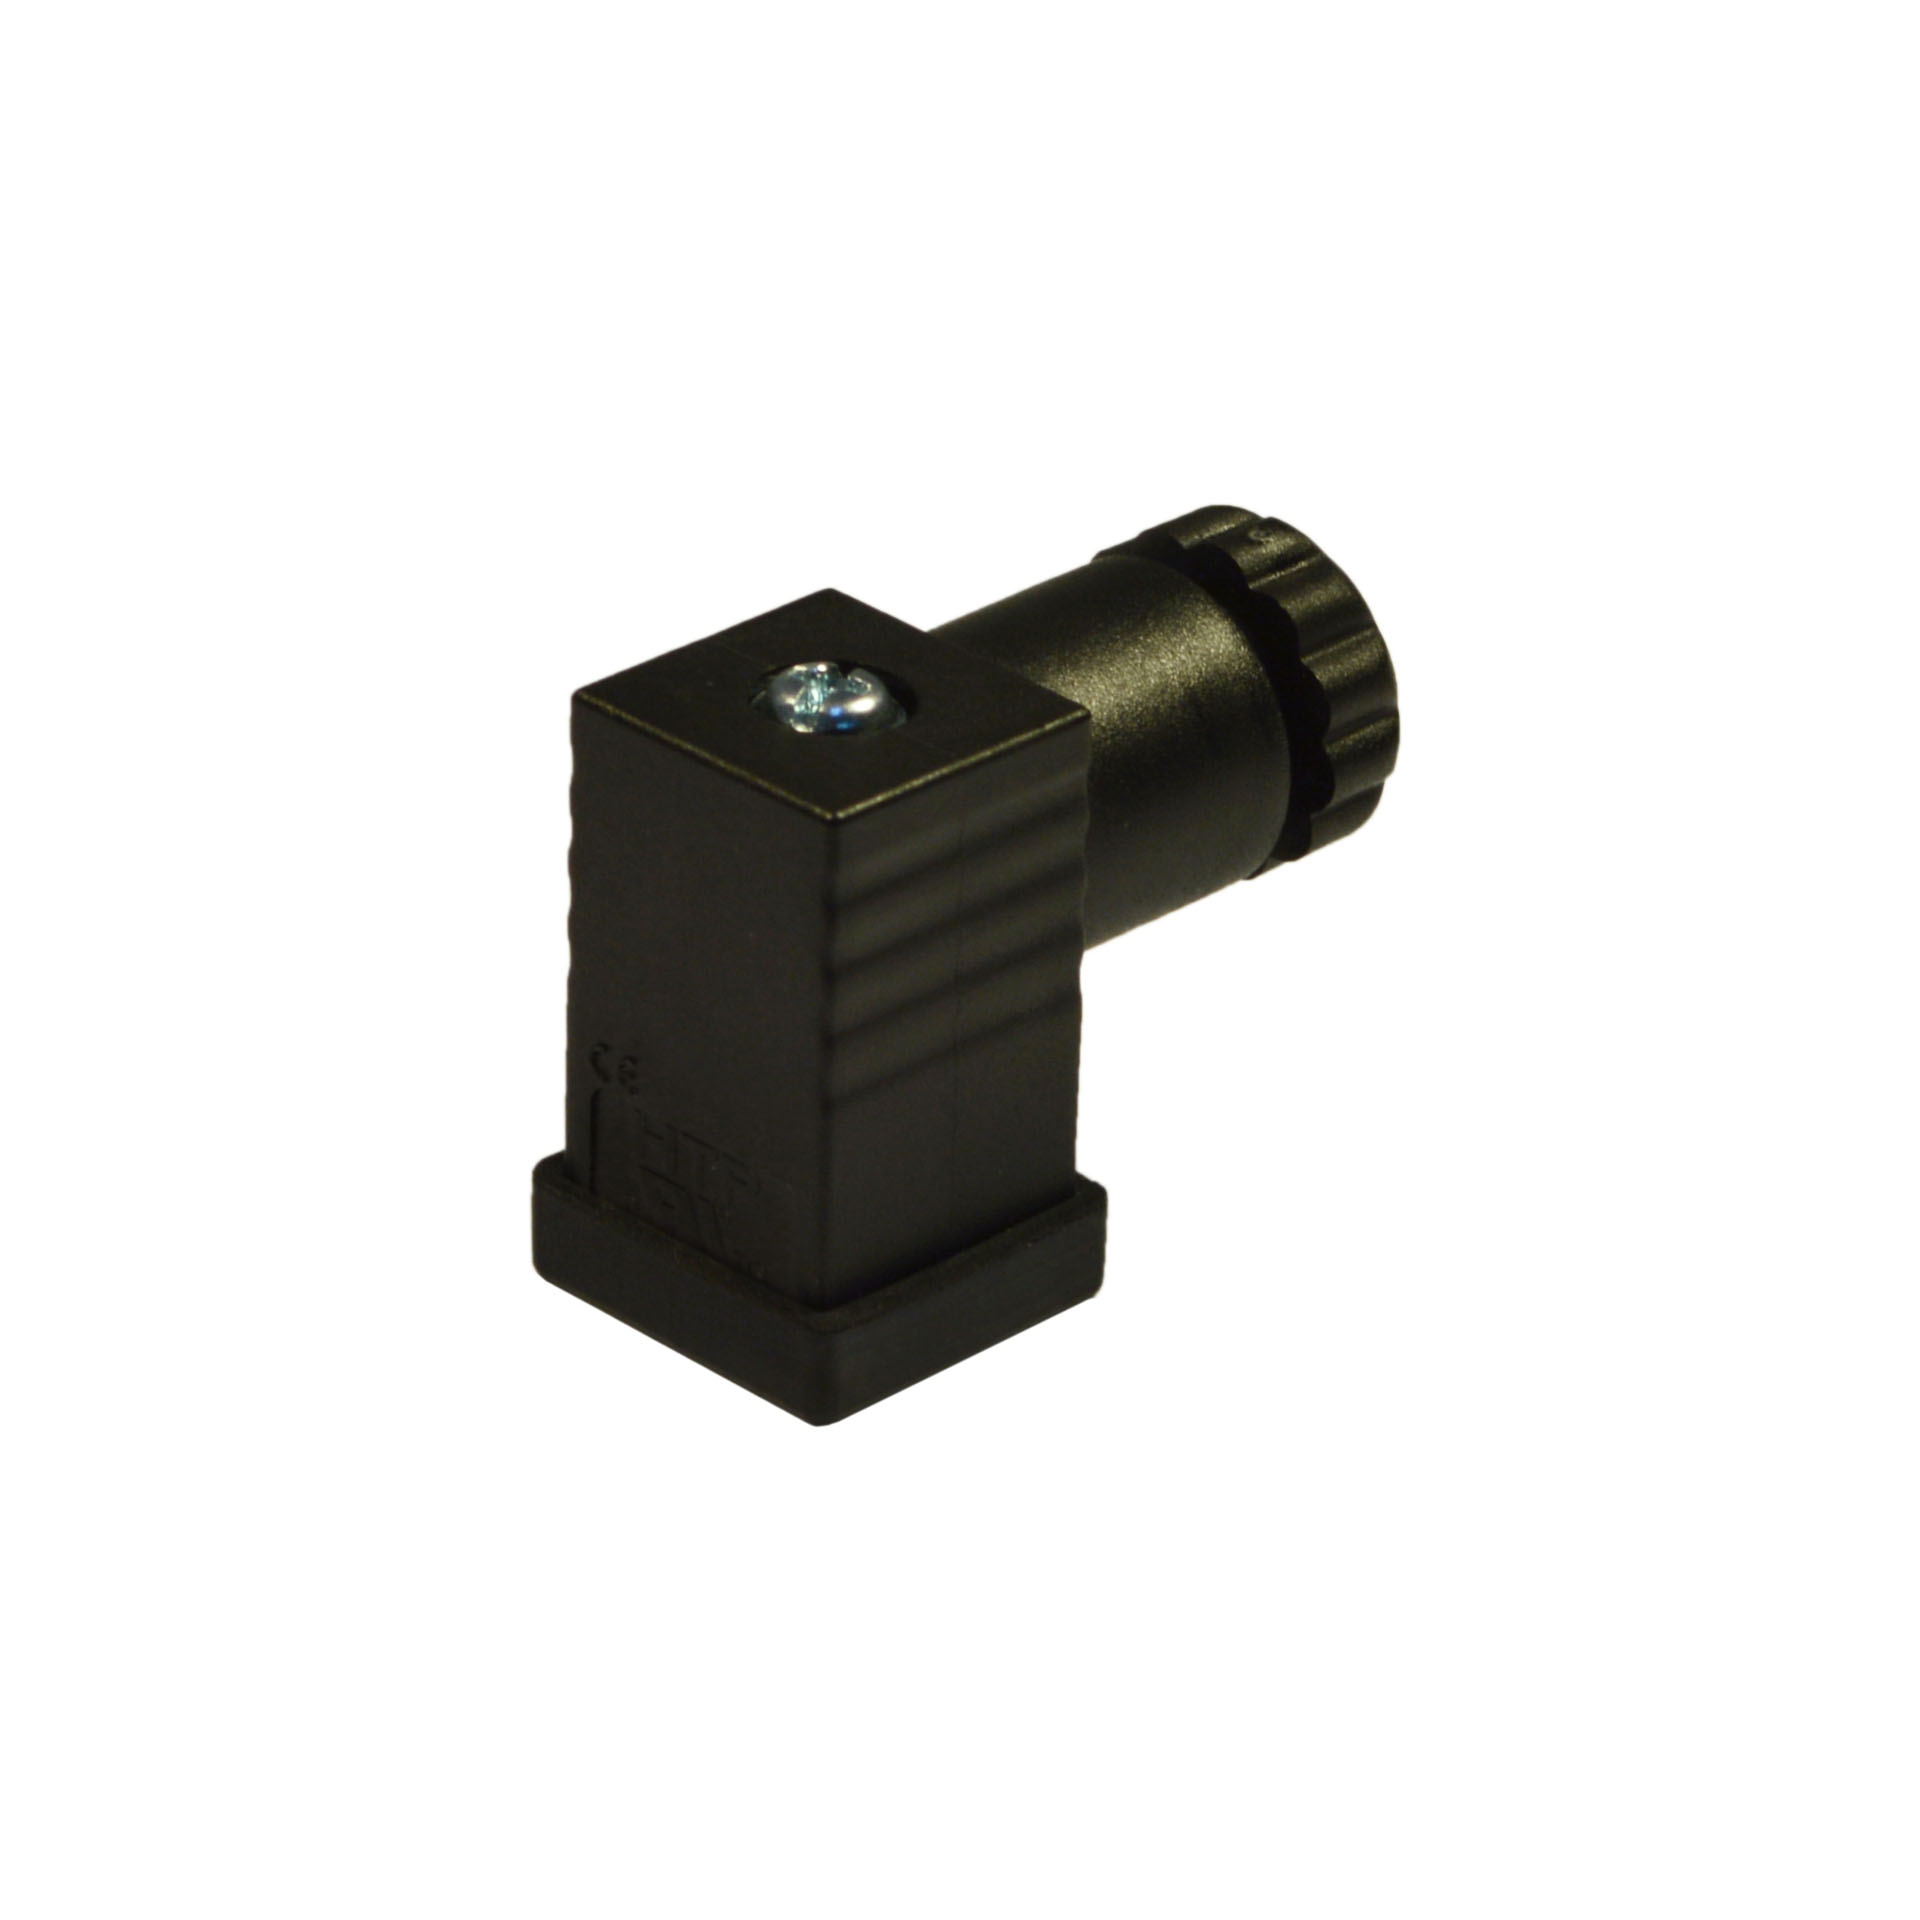 EN175301-803(typeC)field attachable,black,2p+PE(h.6),250VAC/300VDC,PG7,ULapproved